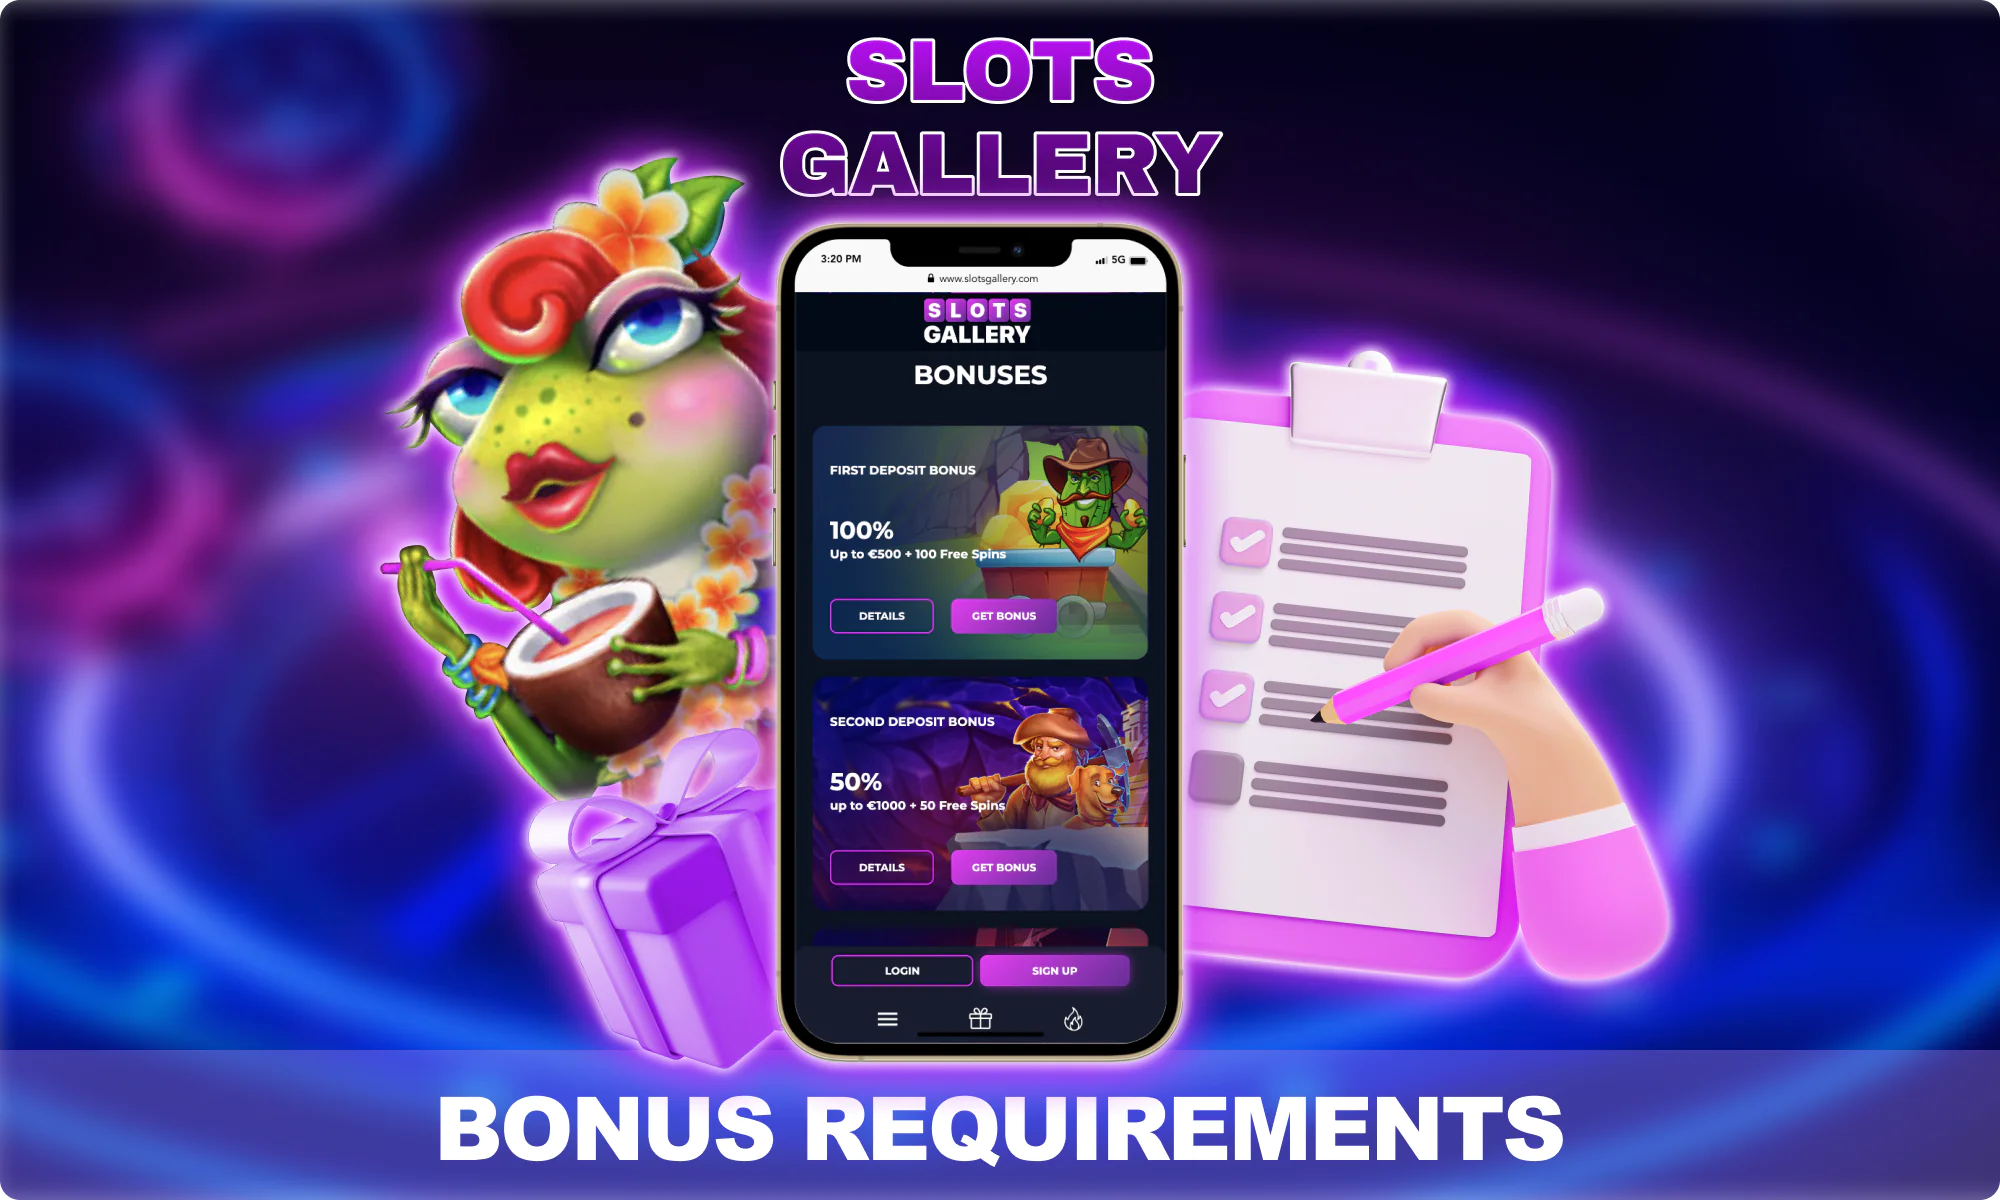 Bonuses terms and conditions at Slots Gallery Casino